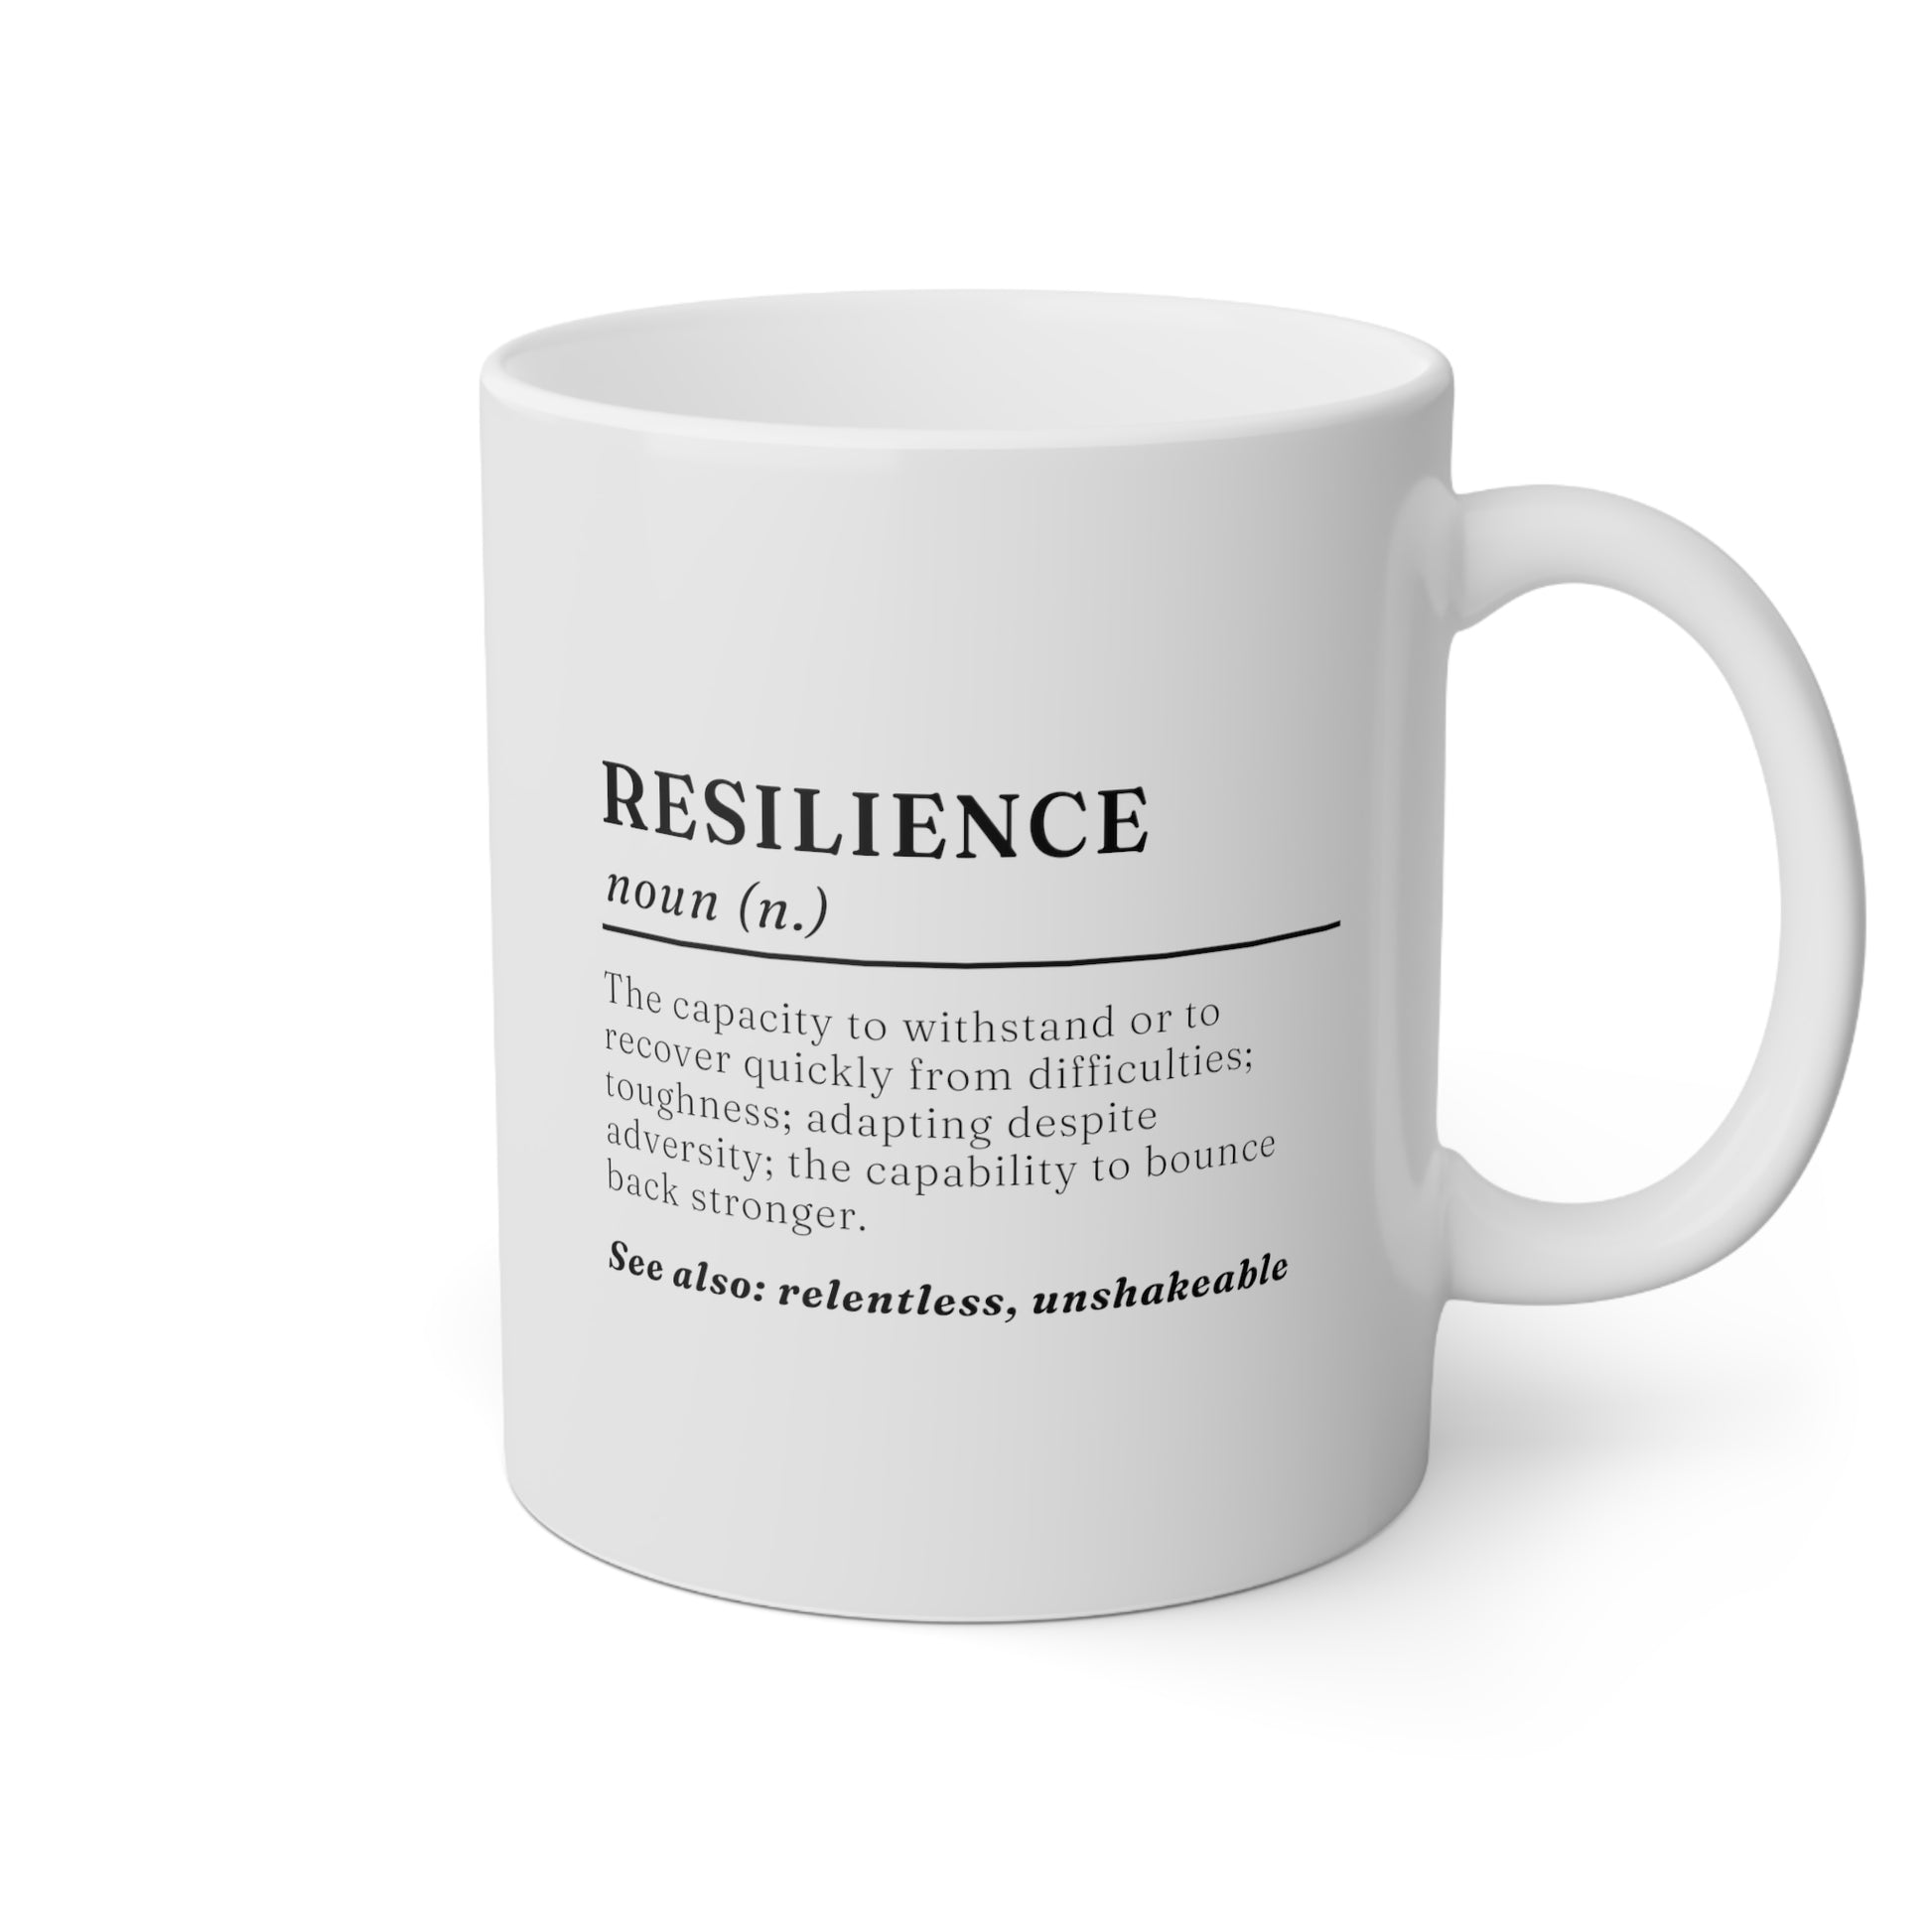 Resilience Definition 11oz white funny large coffee mug gift for friend support perseverance meaning motivational inspirational tough waveywares wavey wares wavywares wavy wares